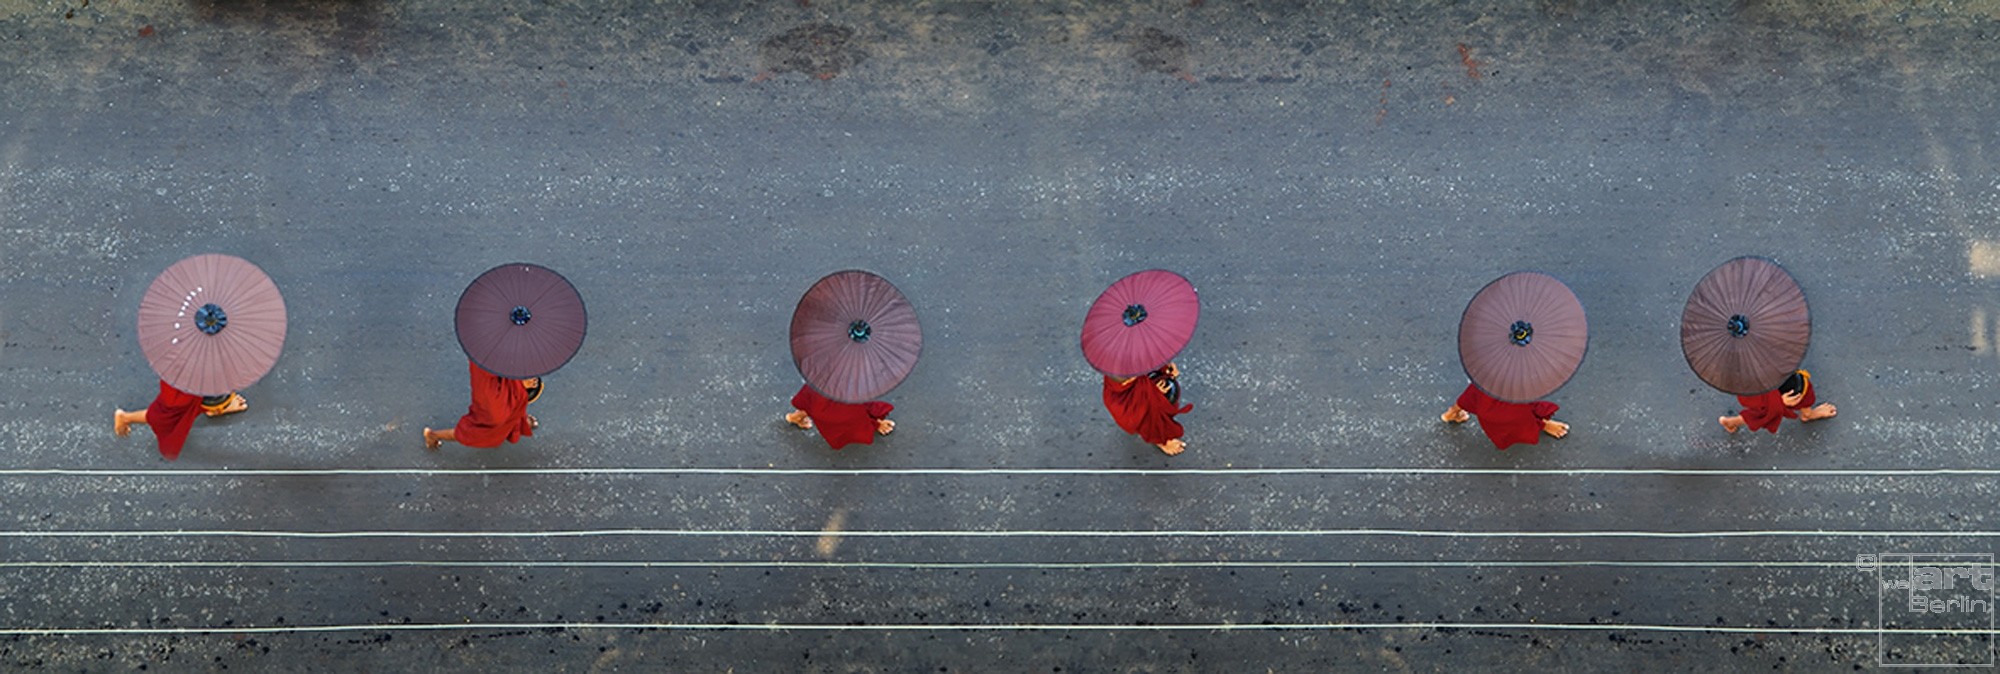 6 Monks, 6 AM (50x150cm) | photography collage by Finkbeiner & Salm, direct print on aluminium dibond, edition